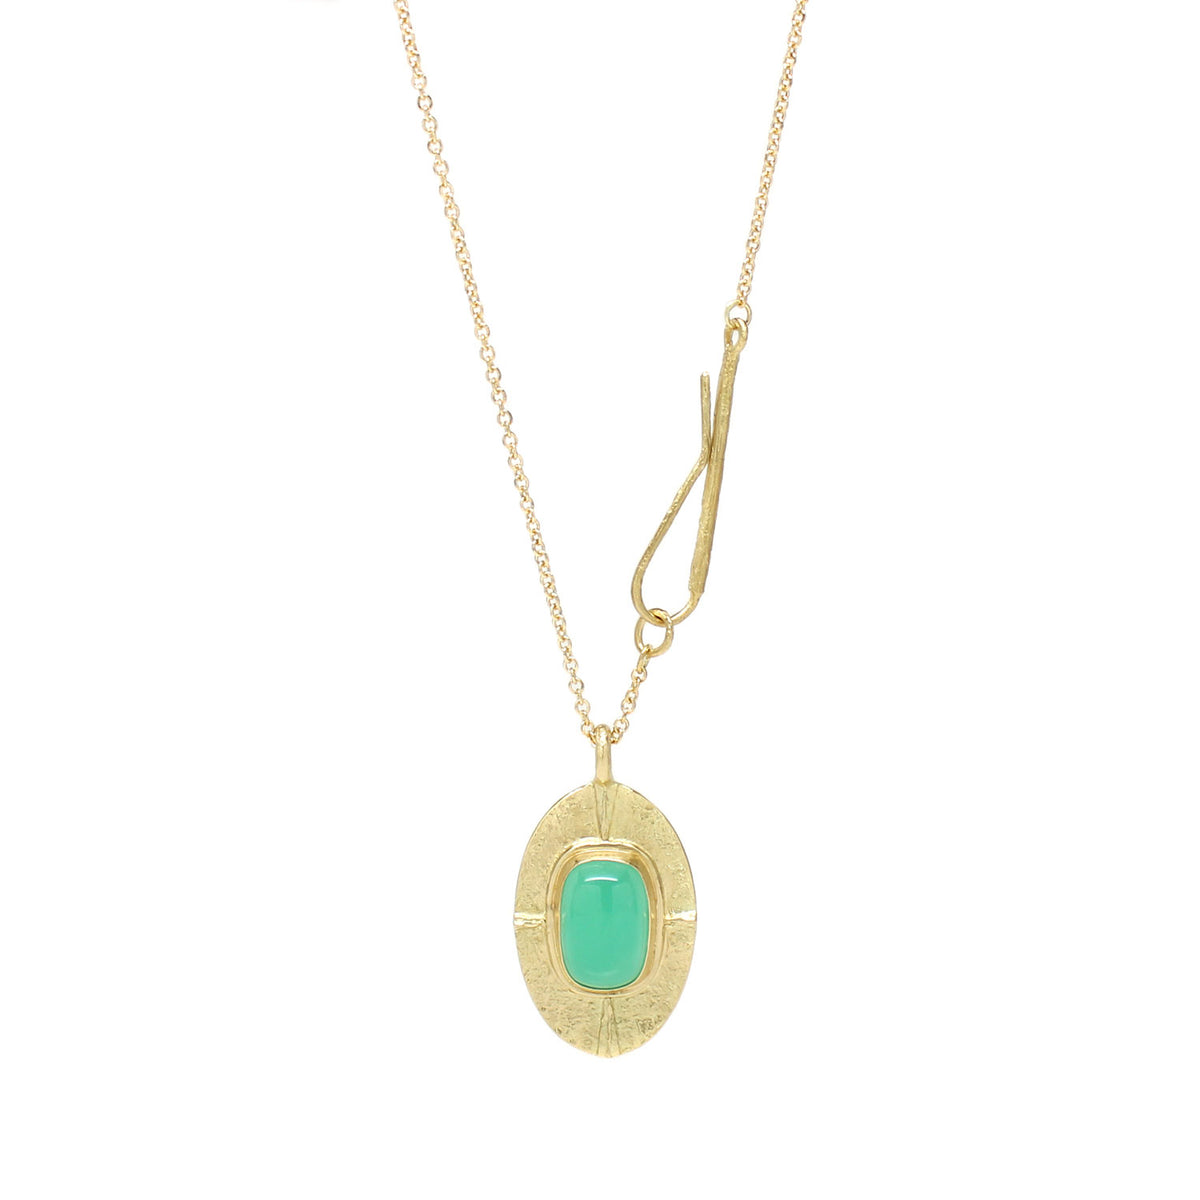 One-of-a-Kind Radial Ridge Oval Chrysoprase Necklace